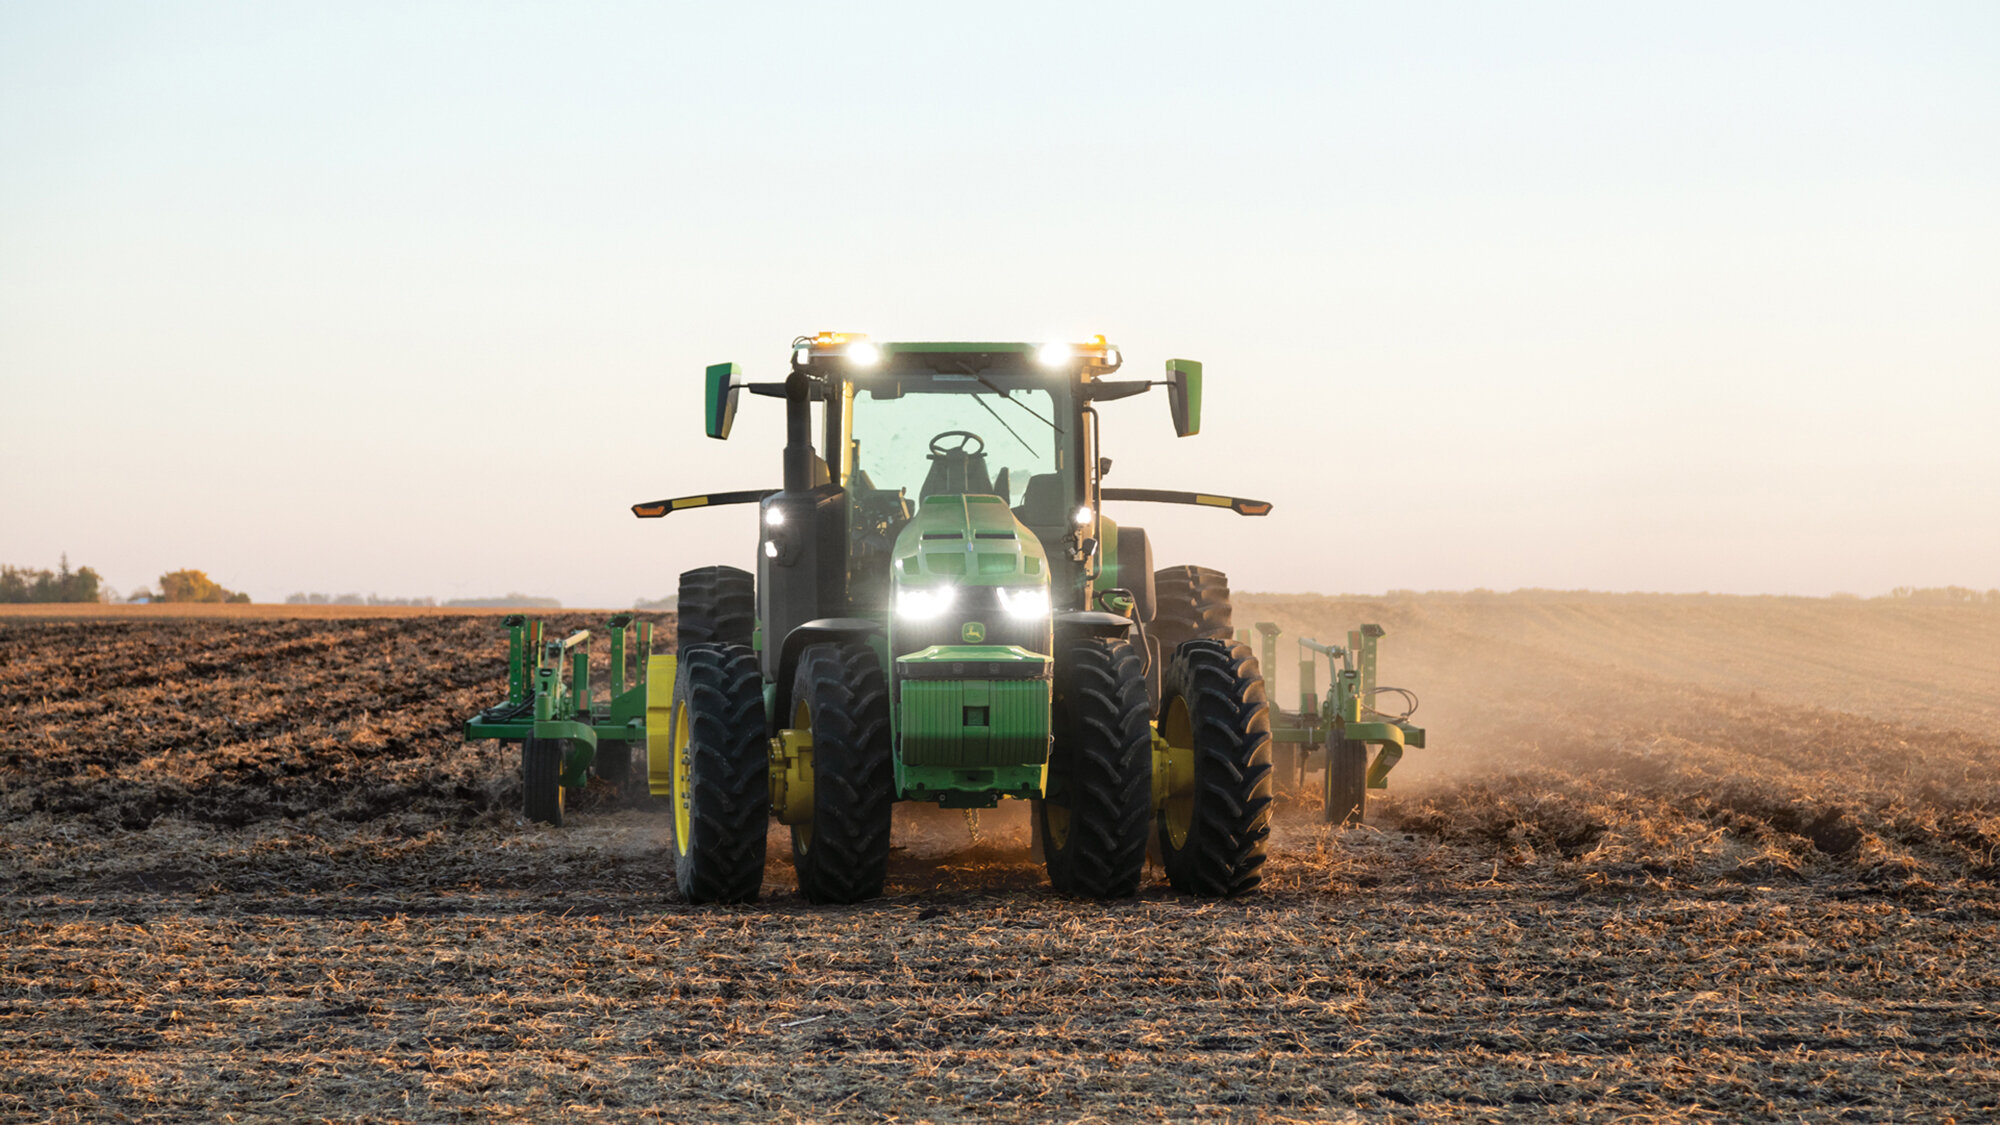 John Deere says it will make the tractor of the future — no driver needed